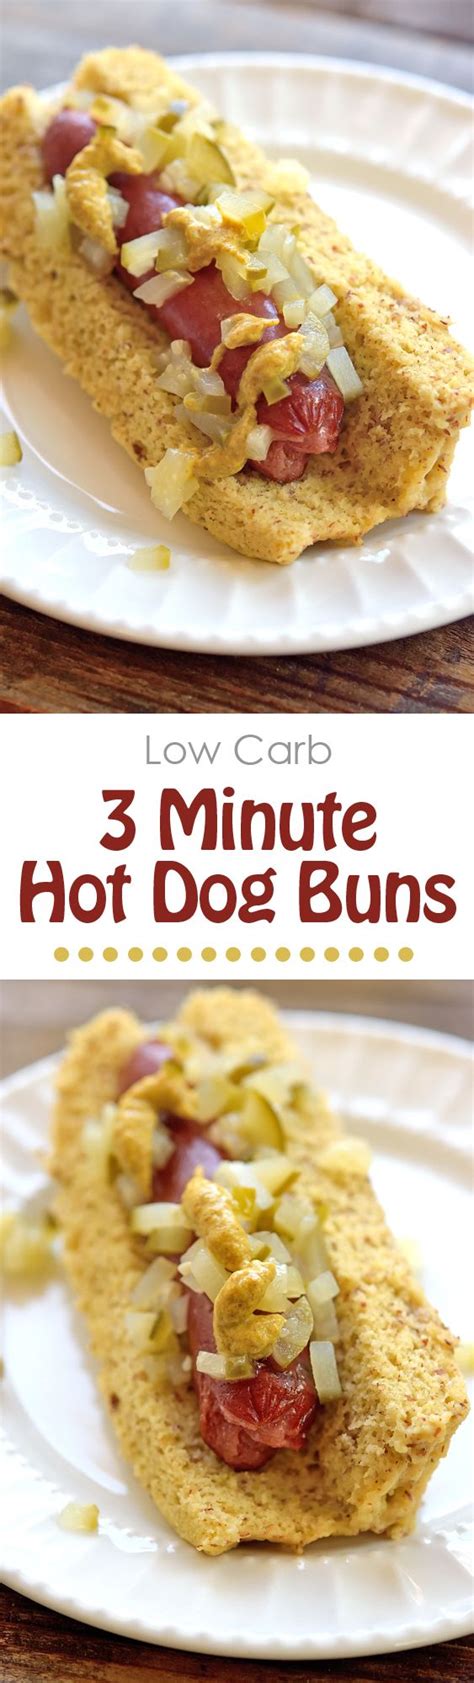 It is high in protein and fiber, with lean meat, pearl barley, brown rice, and veggies such as celery, green beans, and spinach, and very low in carbohydrates , that can interfere with proper insulin levels in your. These low carb hot dog buns come together in 3 minutes ...